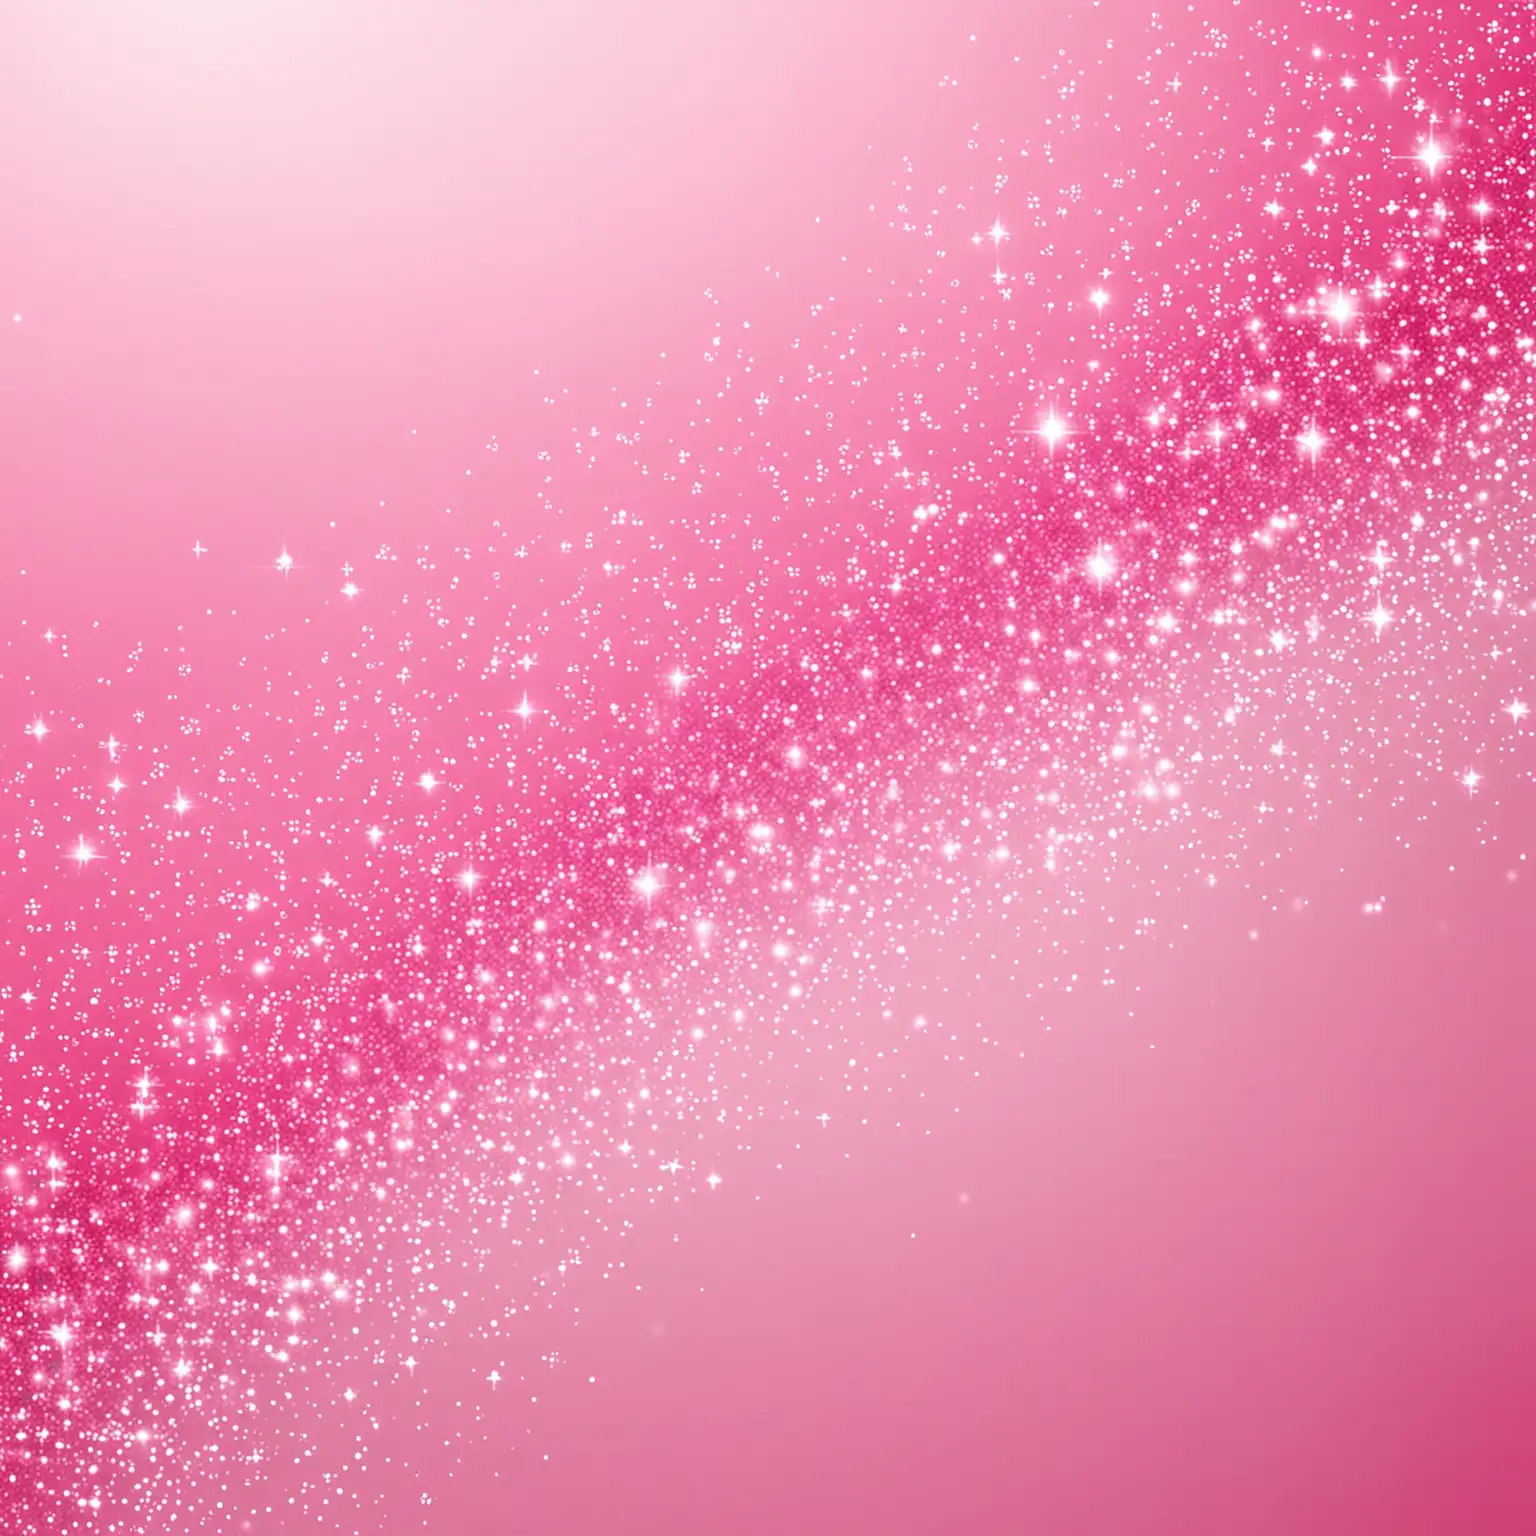 pink sparkly and elegant background
